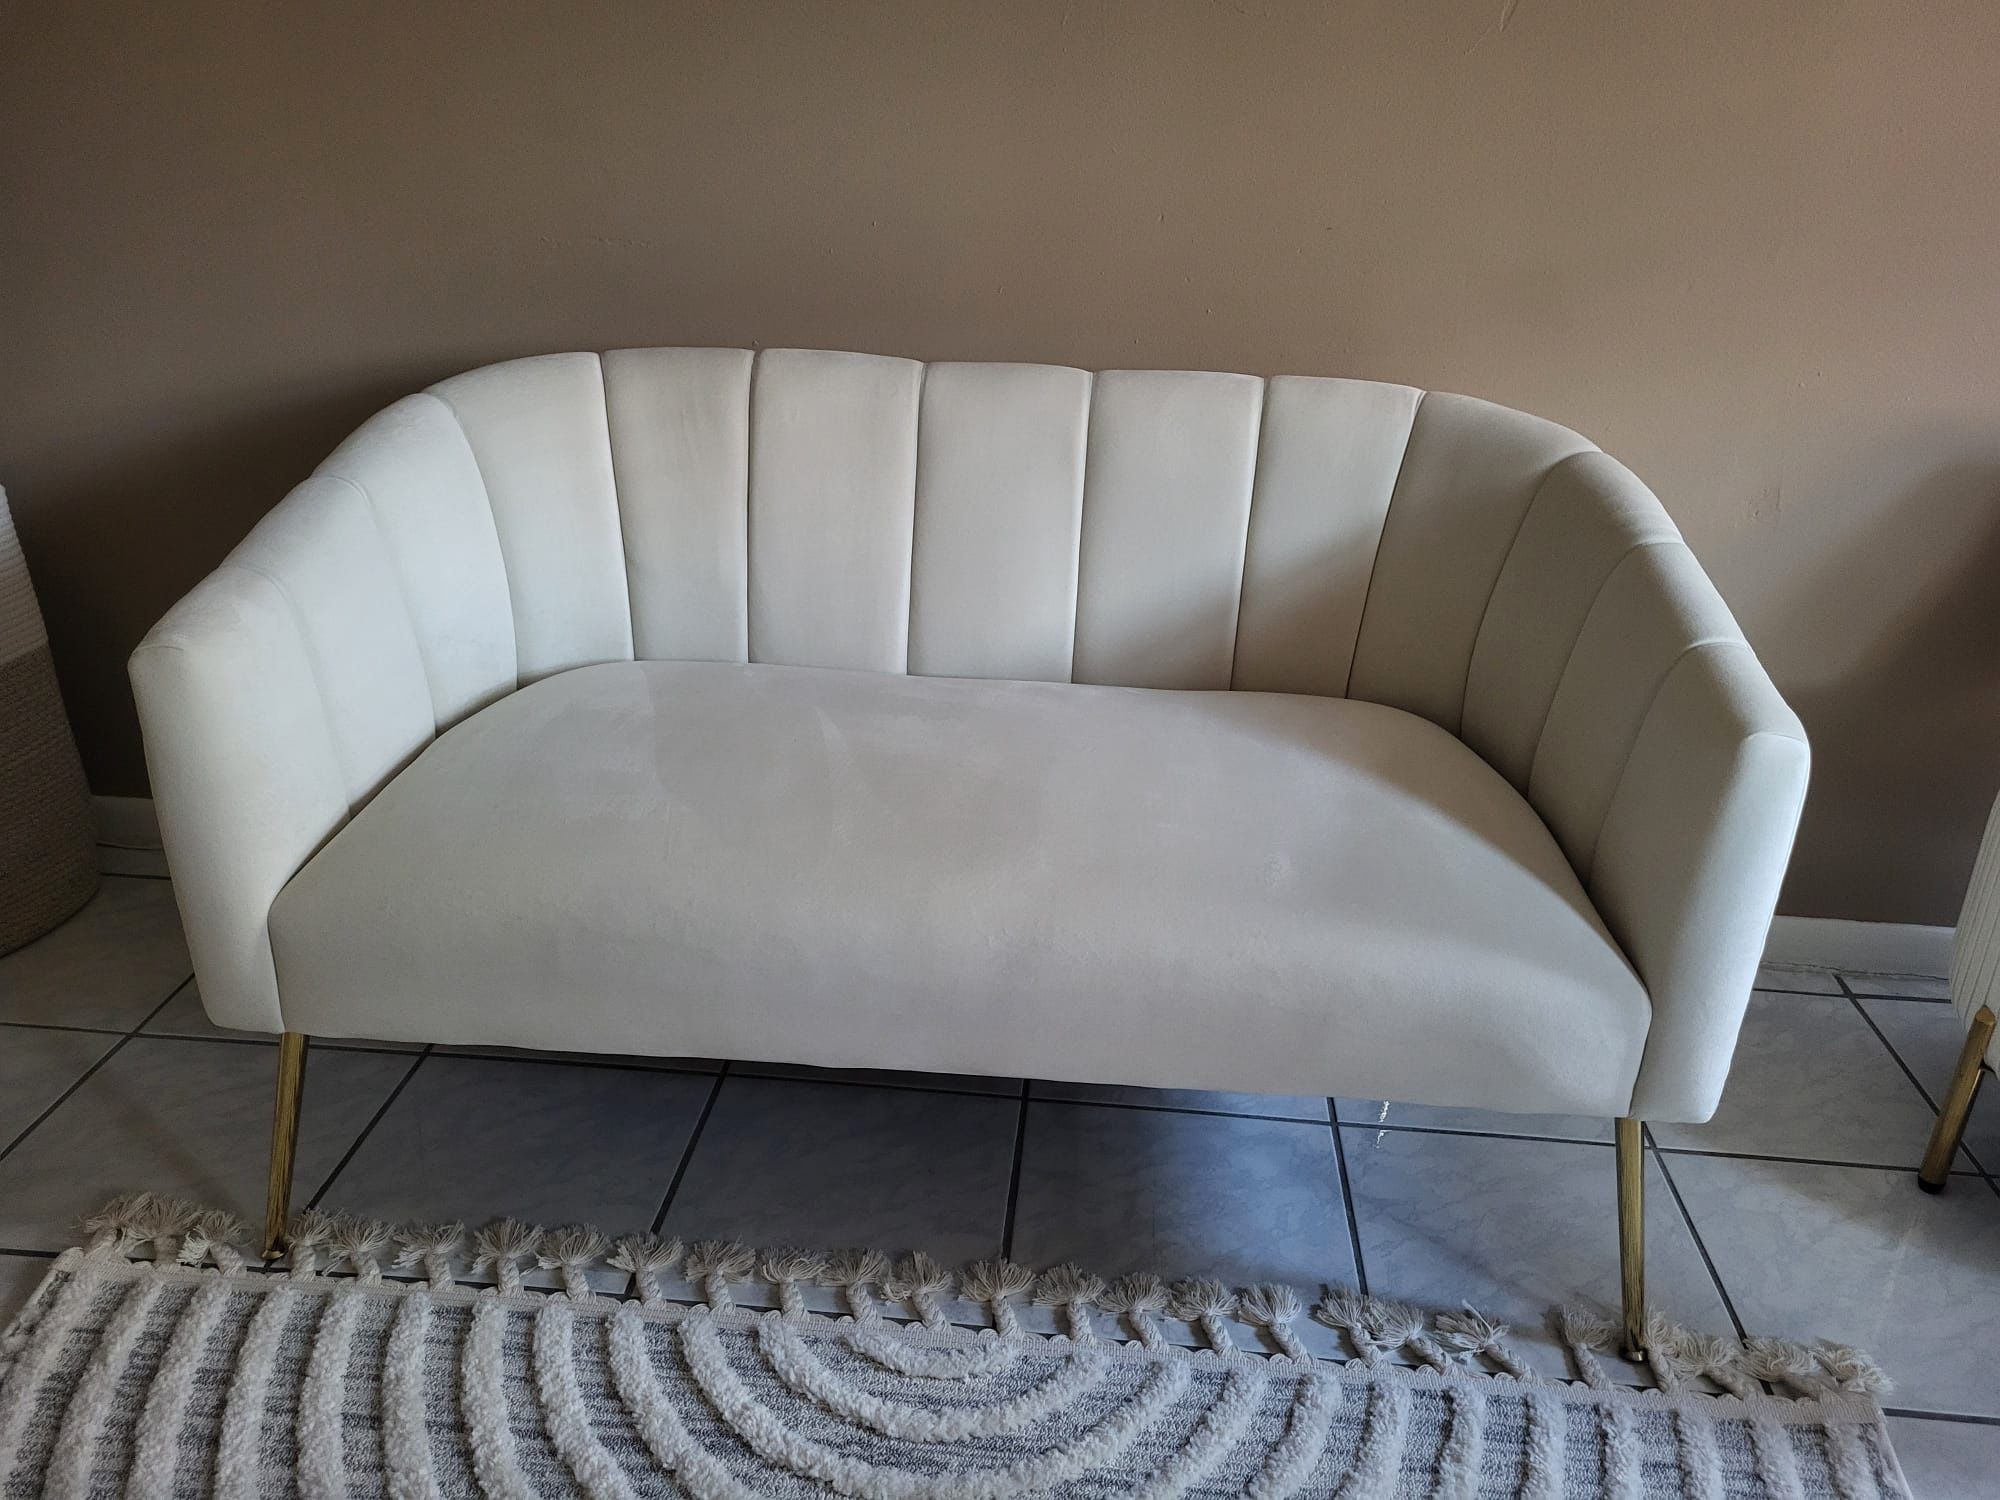 Loveseat Real White Leather Couch